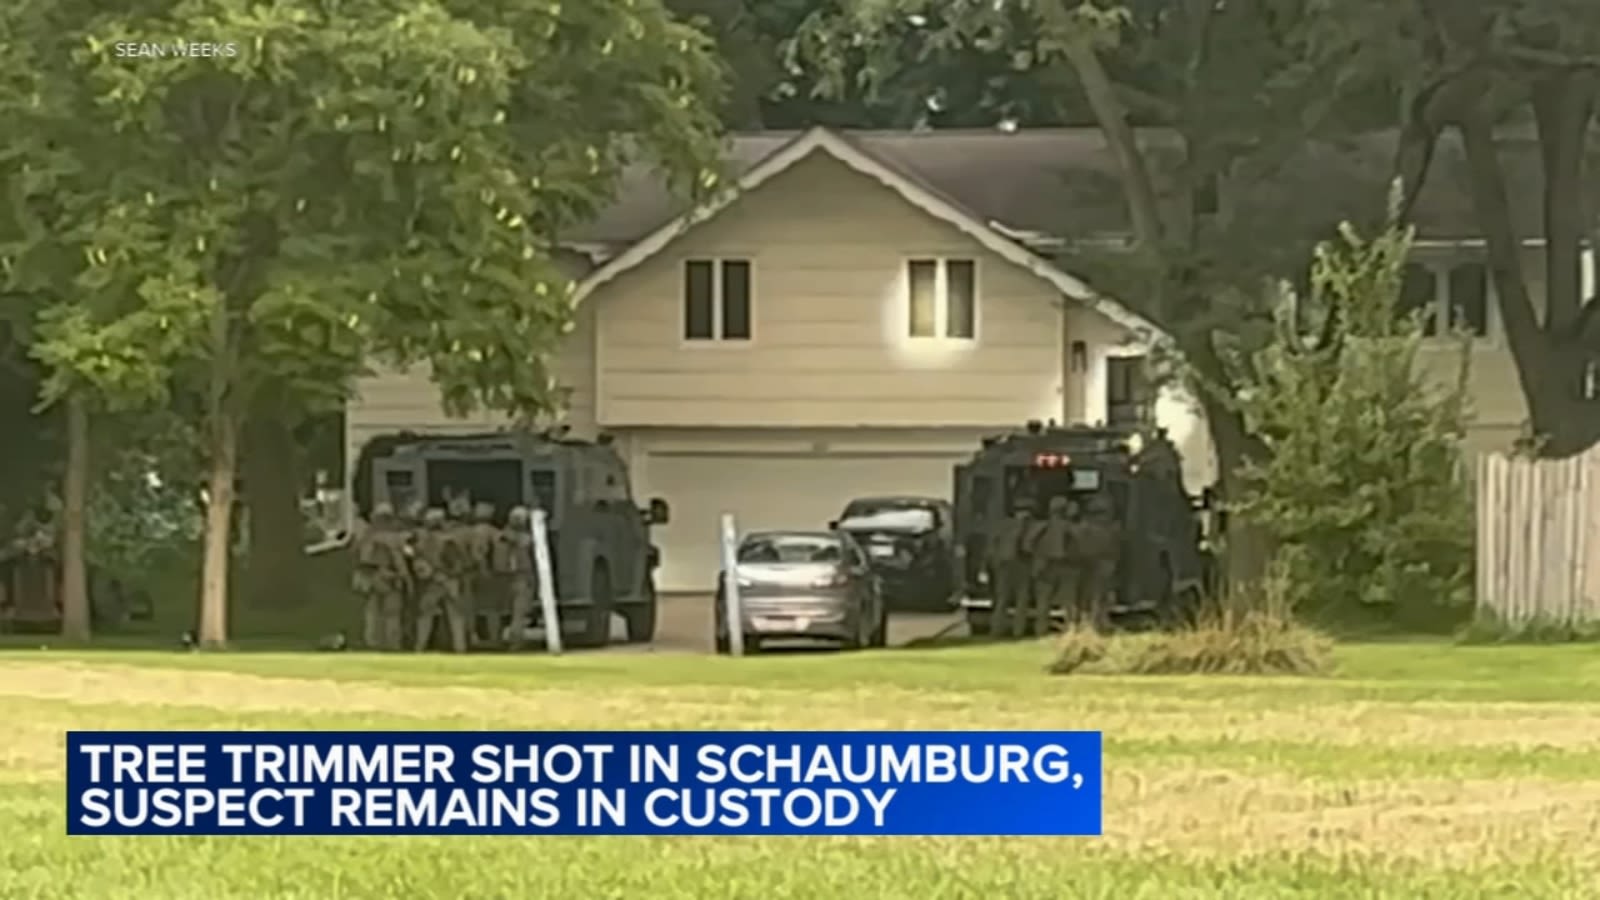 Schaumburg man charged with shooting tree trimmer over noise, leading to hours-long standoff